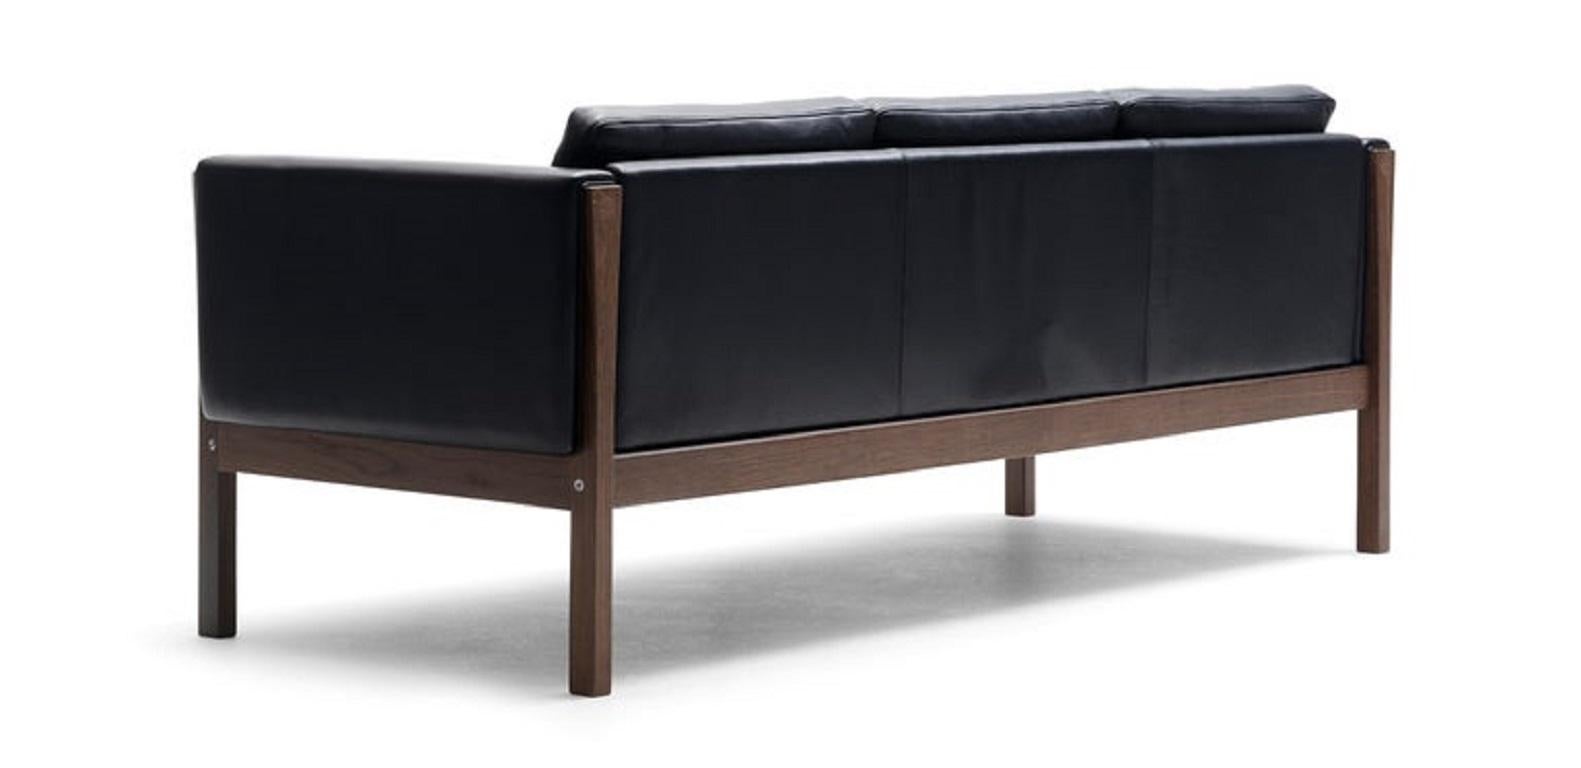 Modern CH163 Sofa in Walnut Oil Frame with Sif 98 Leather Upholstery by Hans J. Wegner